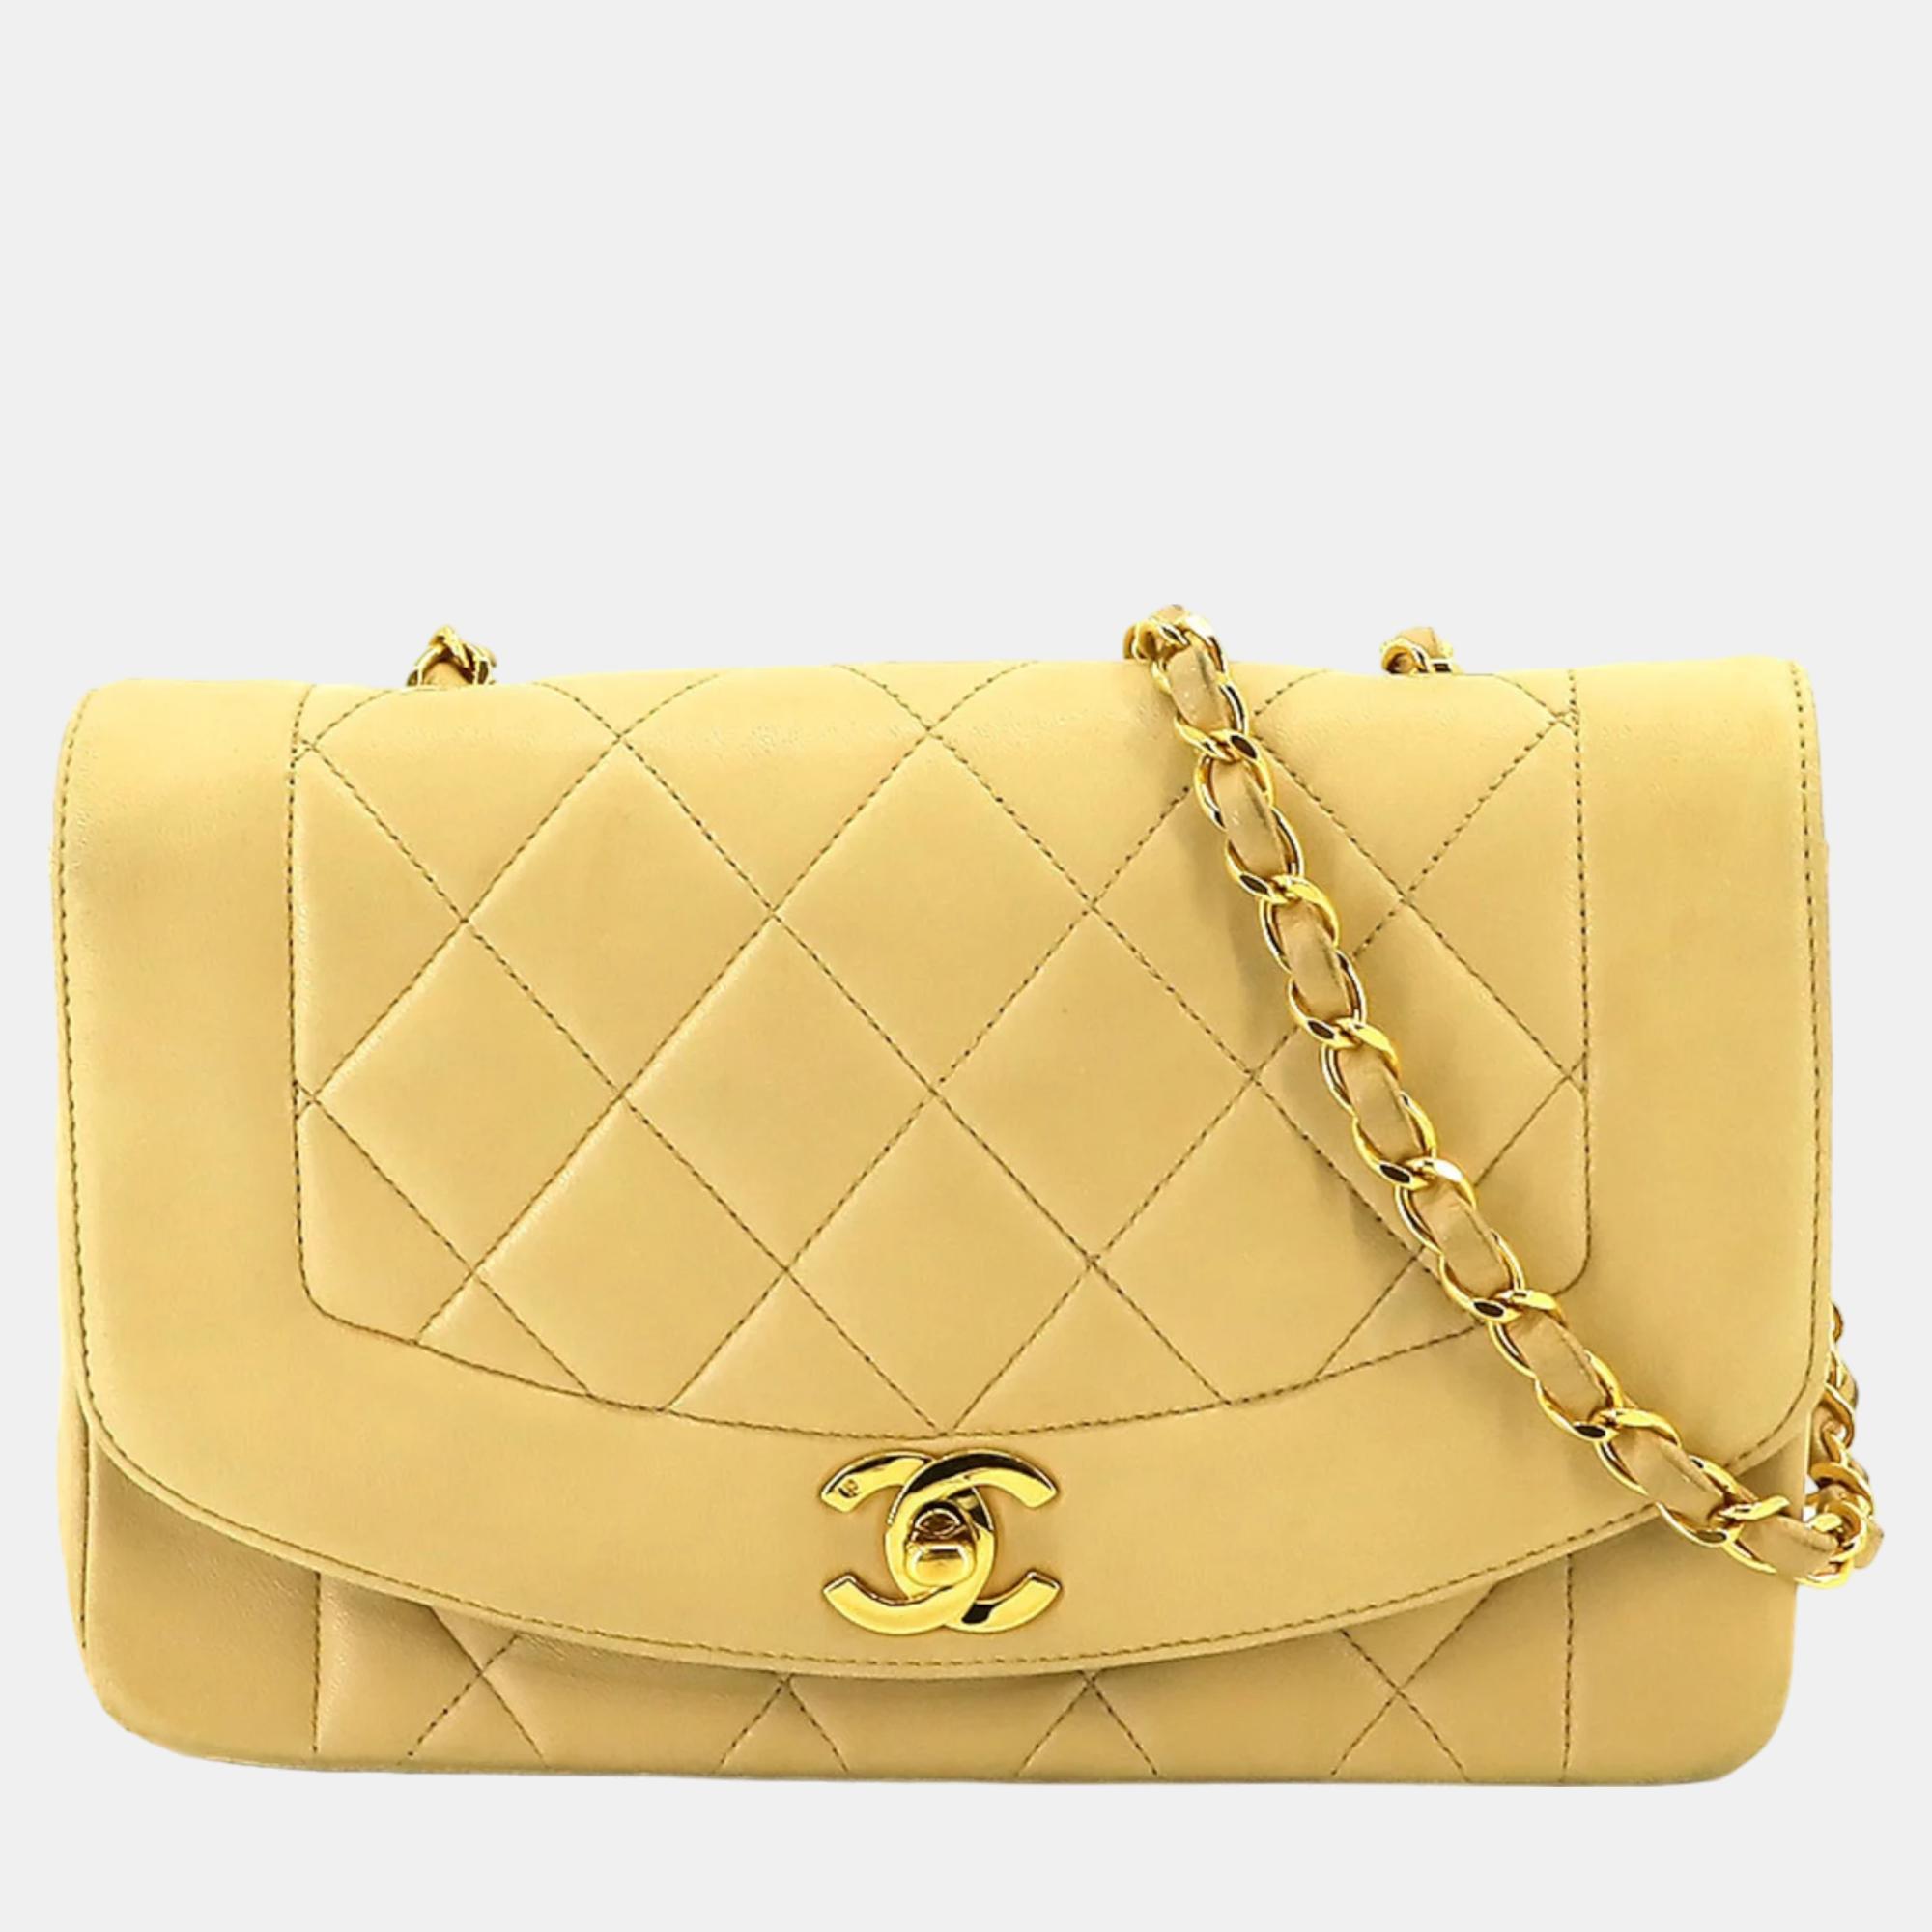 Chanel beige quilted lambskin small vintage diana flap bag